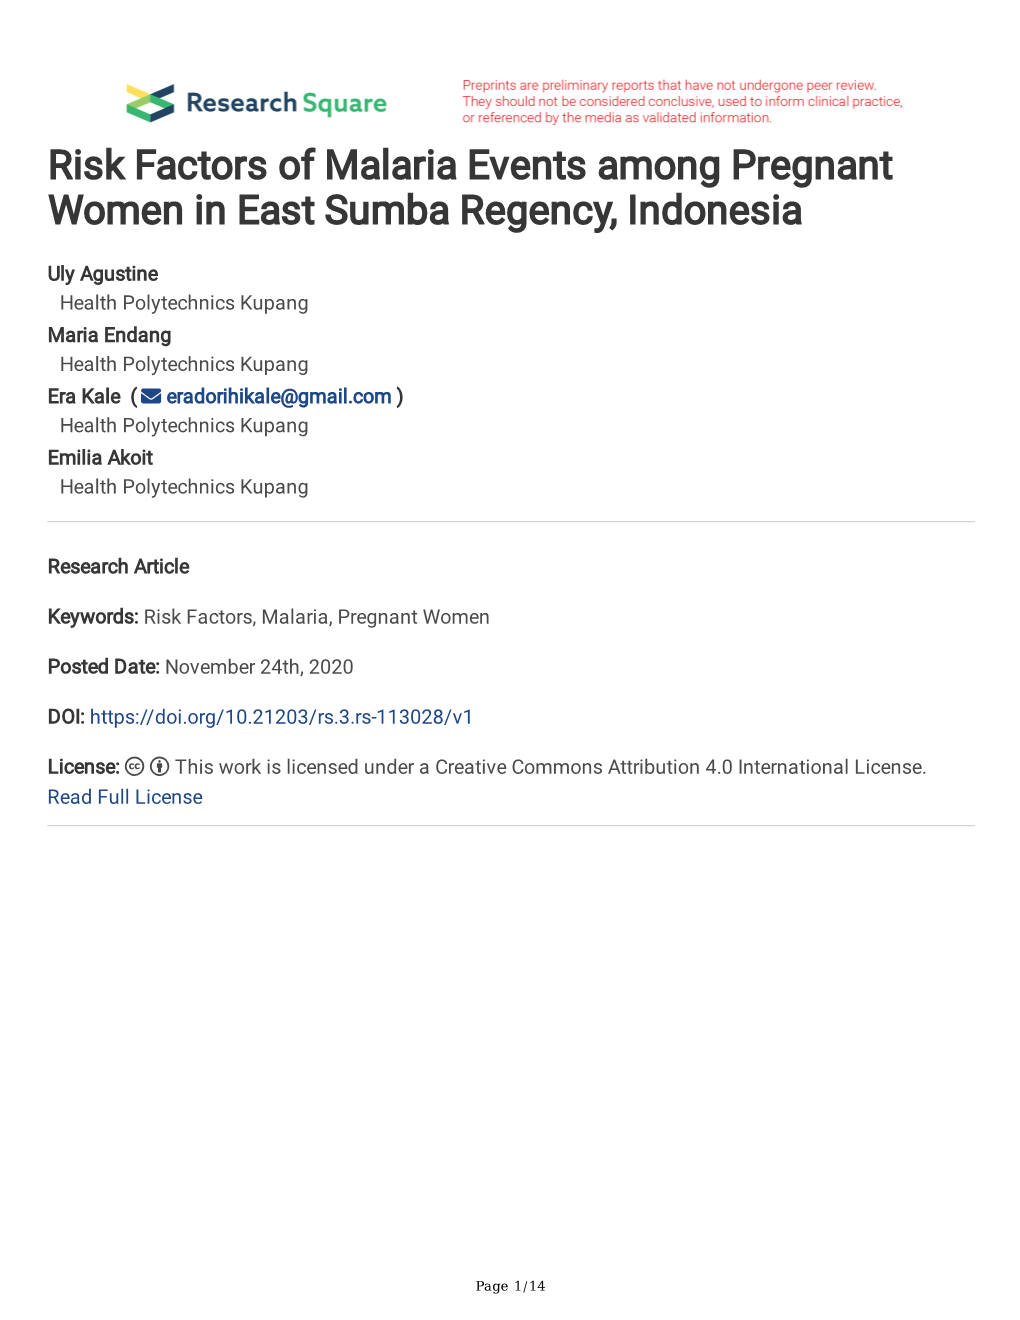 Risk Factors of Malaria Events Among Pregnant Women in East Sumba Regency, Indonesia